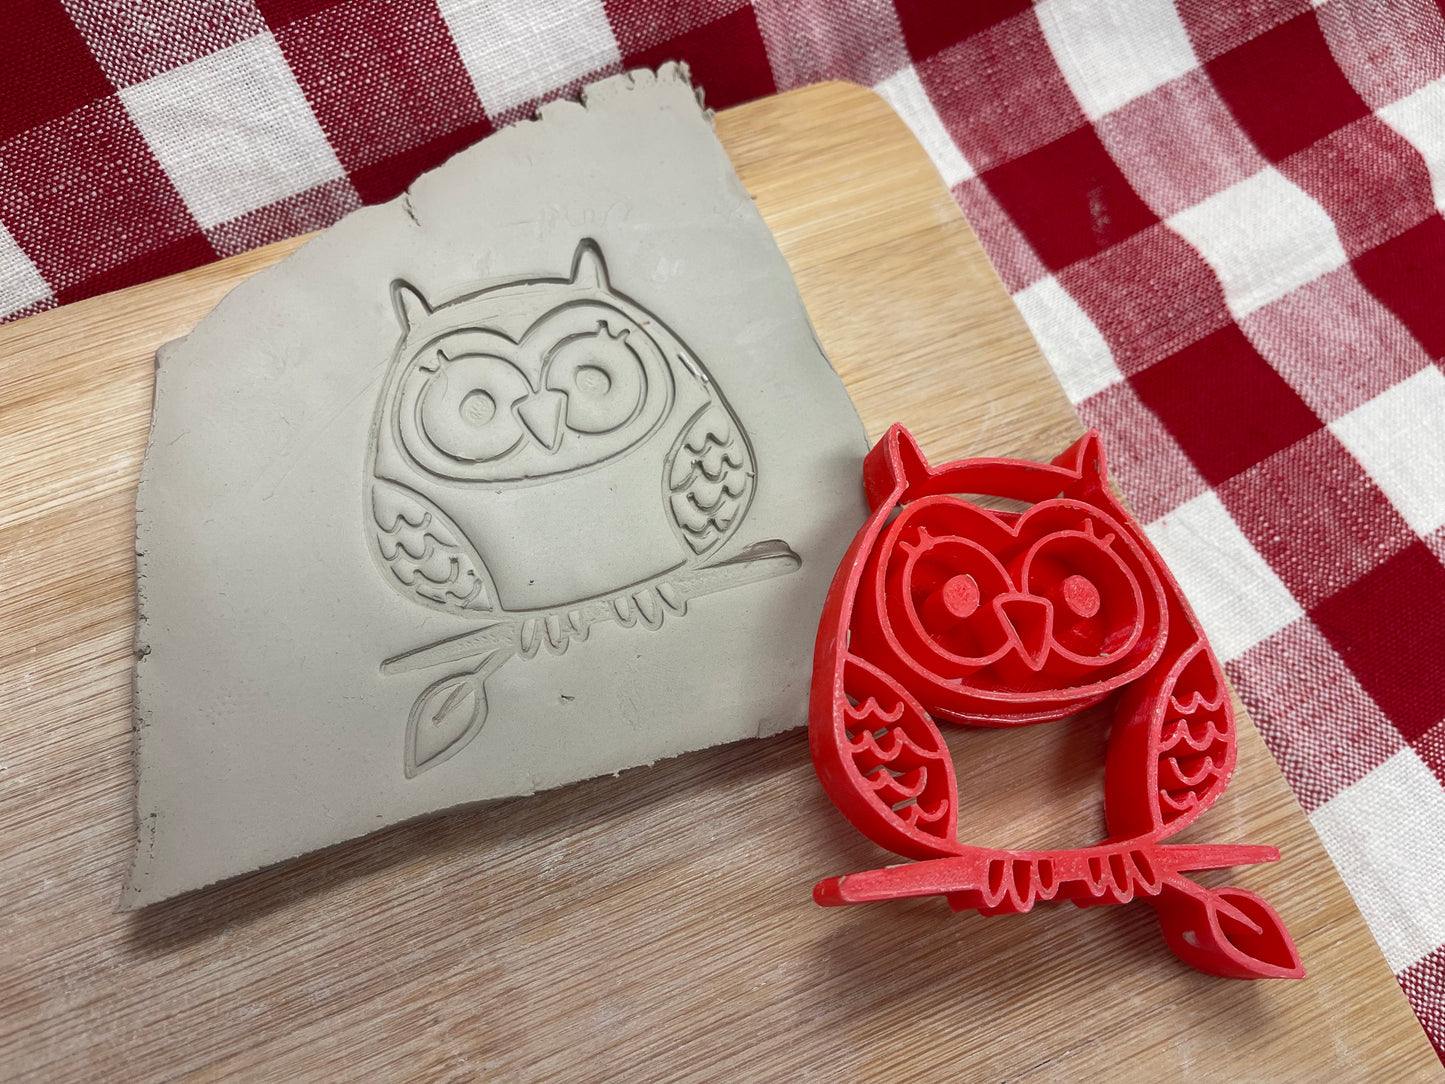 Autumn Stamp Series -  Autumn Owl (on plain branch) stamp, plastic 3D printed, multiple sizes